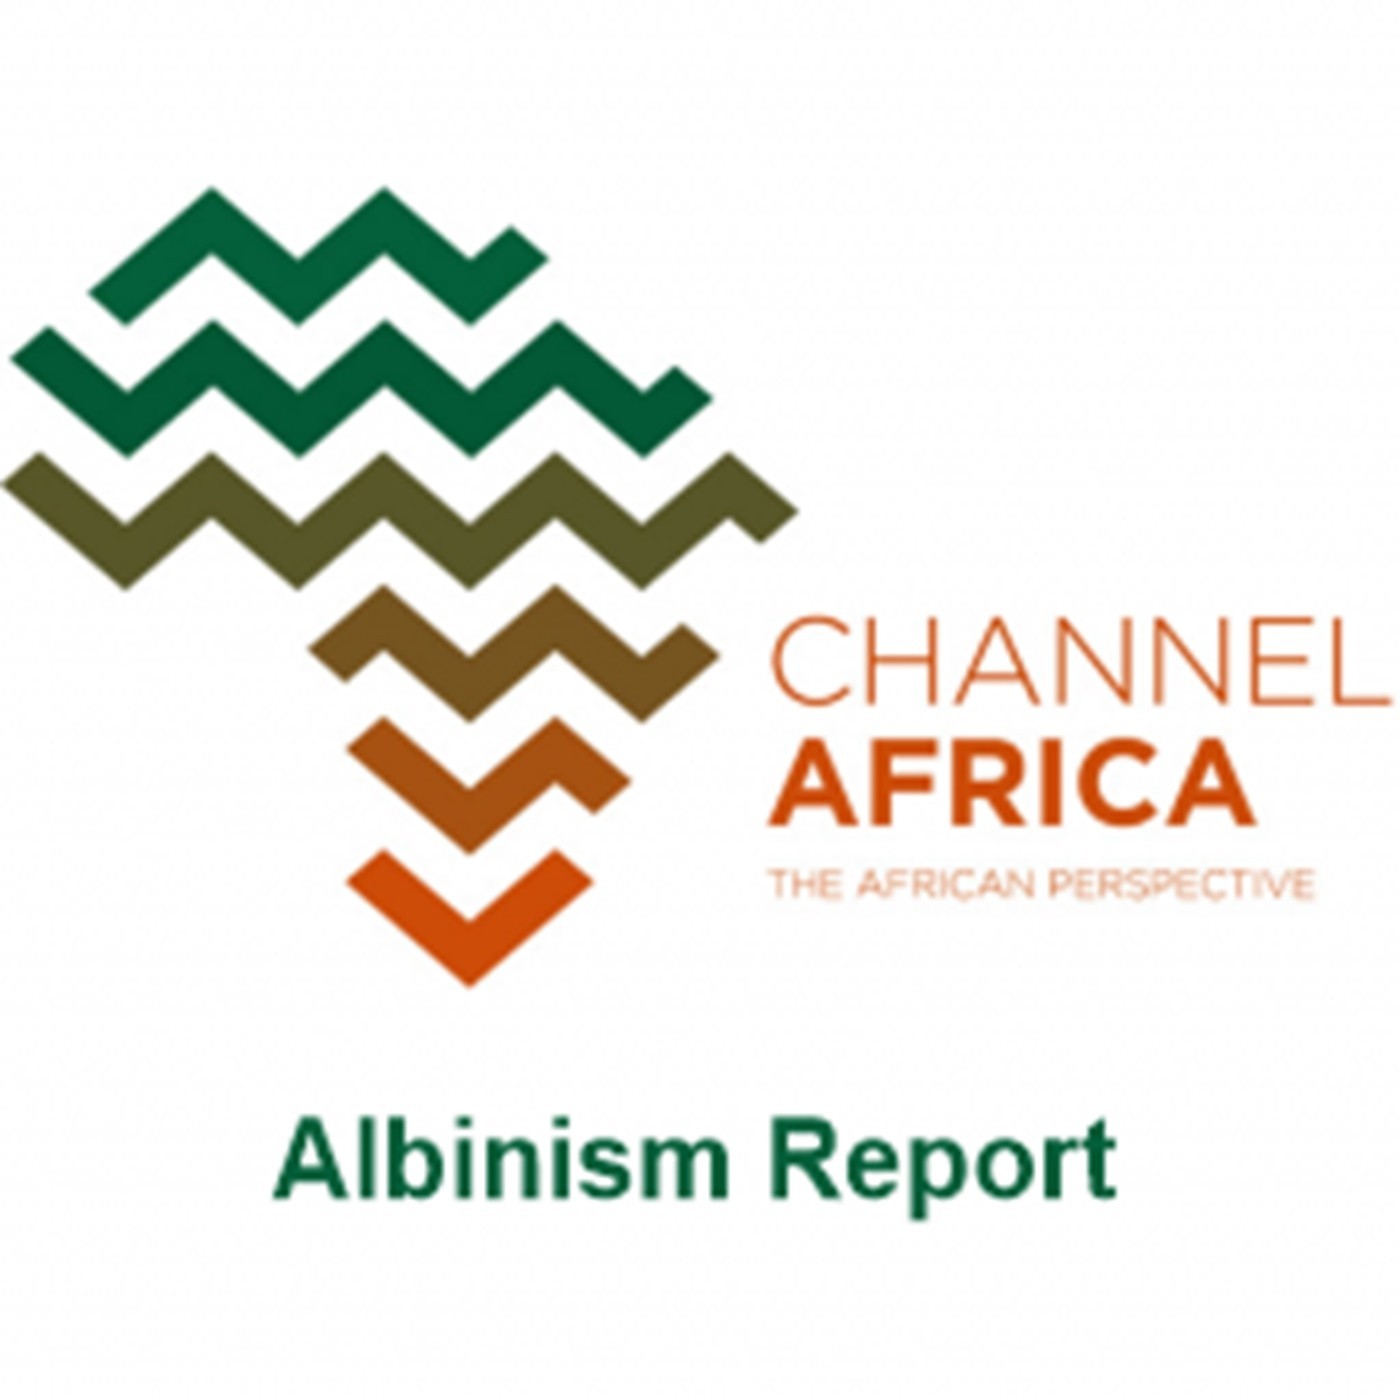 Final Episode of The Albinism Report